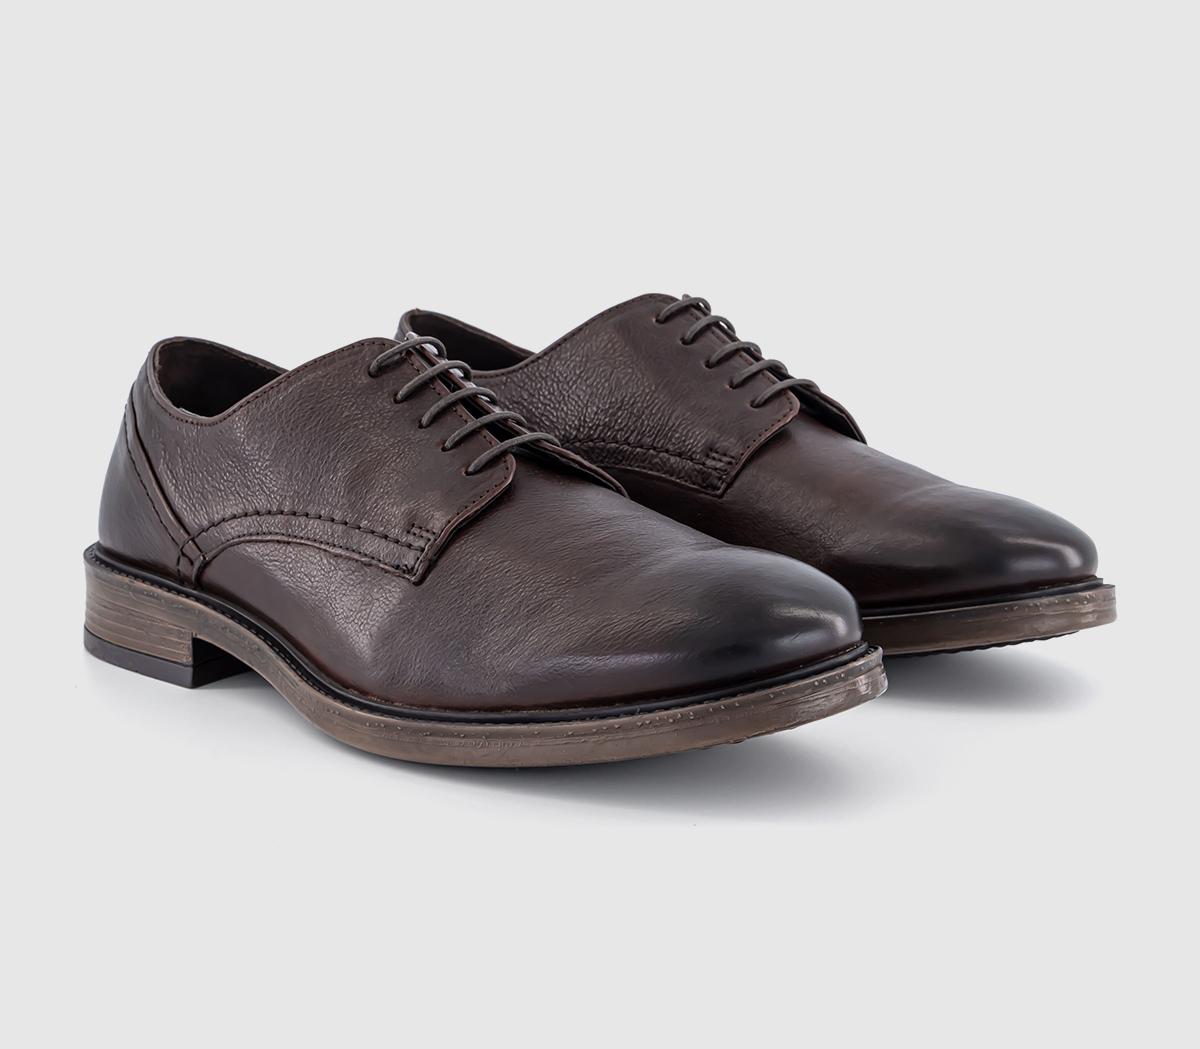 OFFICE Cadeleigh Casual Leather Derby Shoes Brown, 8